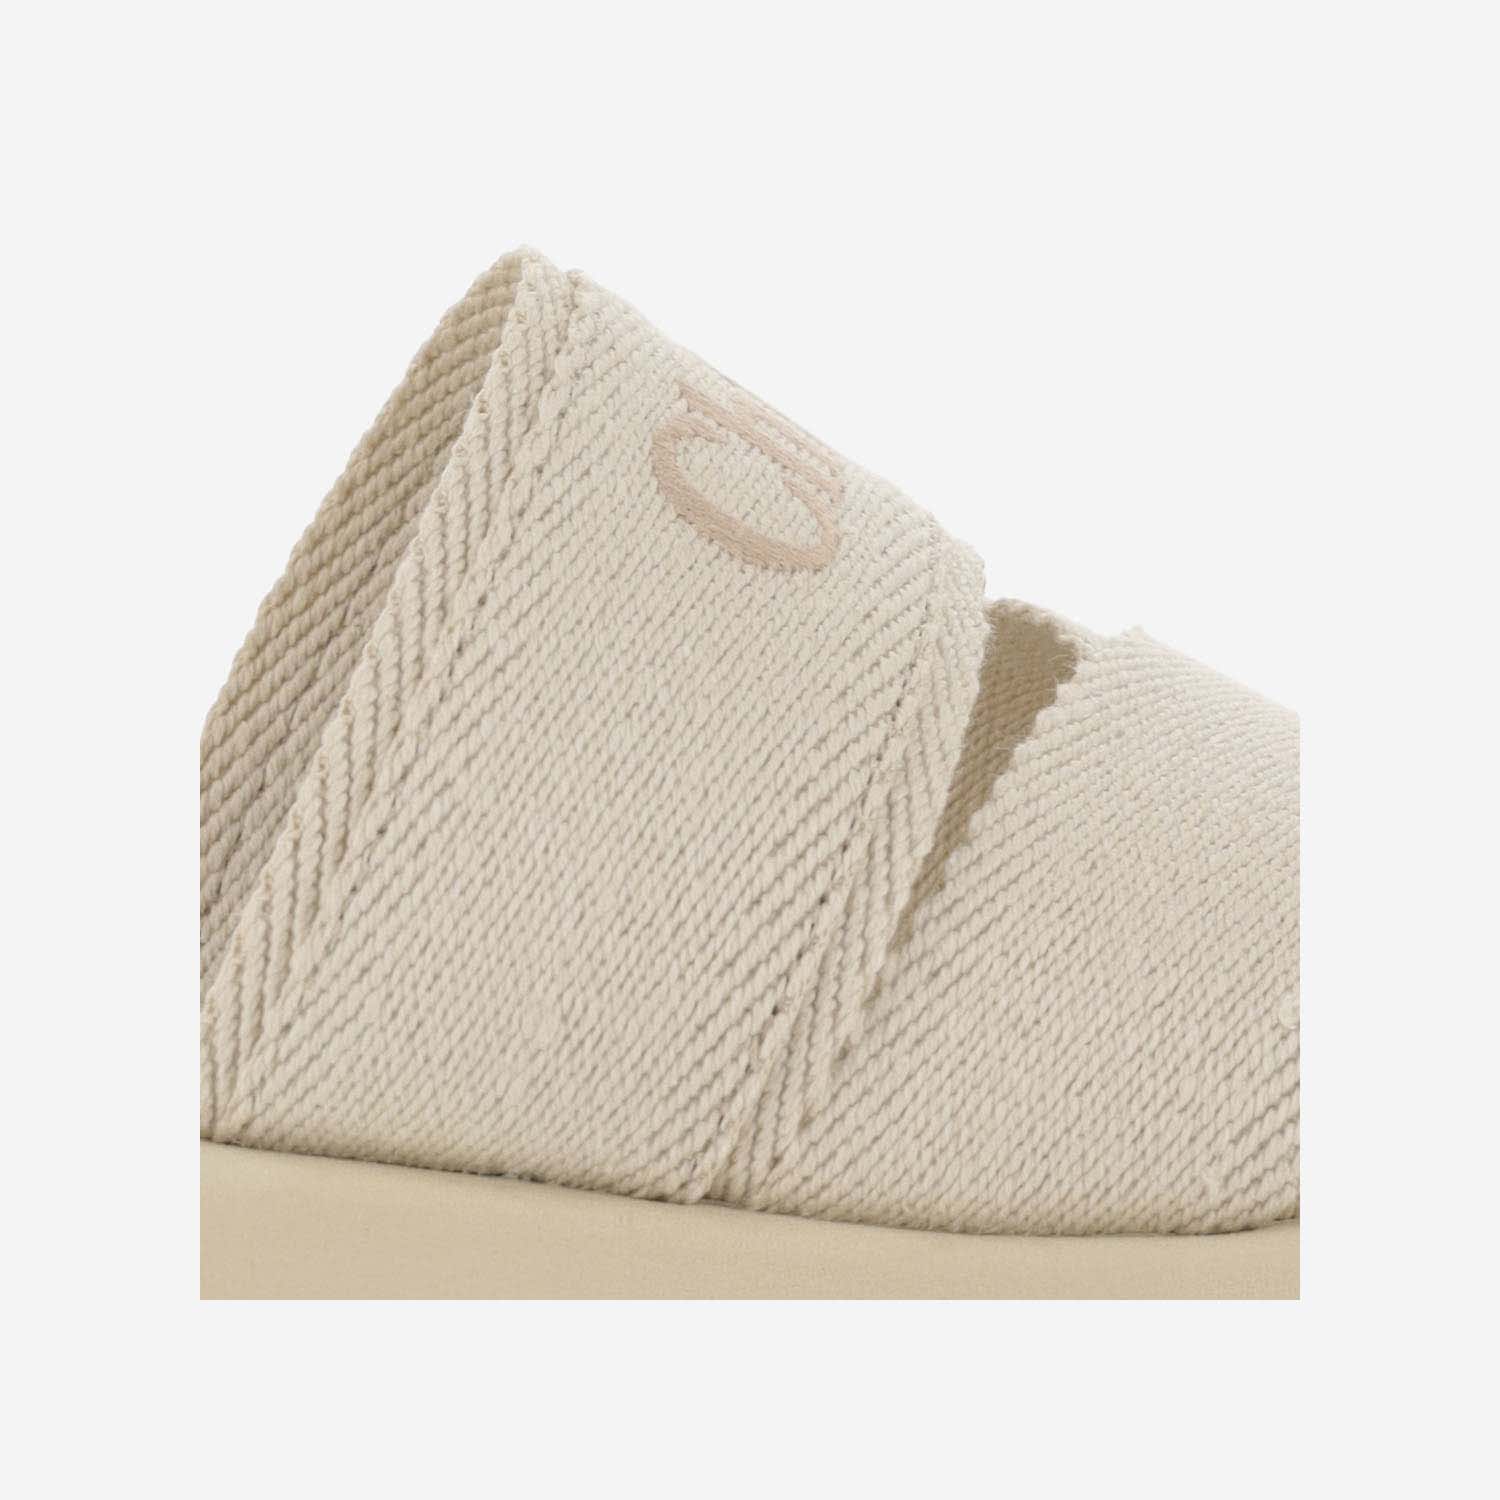 Shop Chloé Canvas Sandals With Logo In White